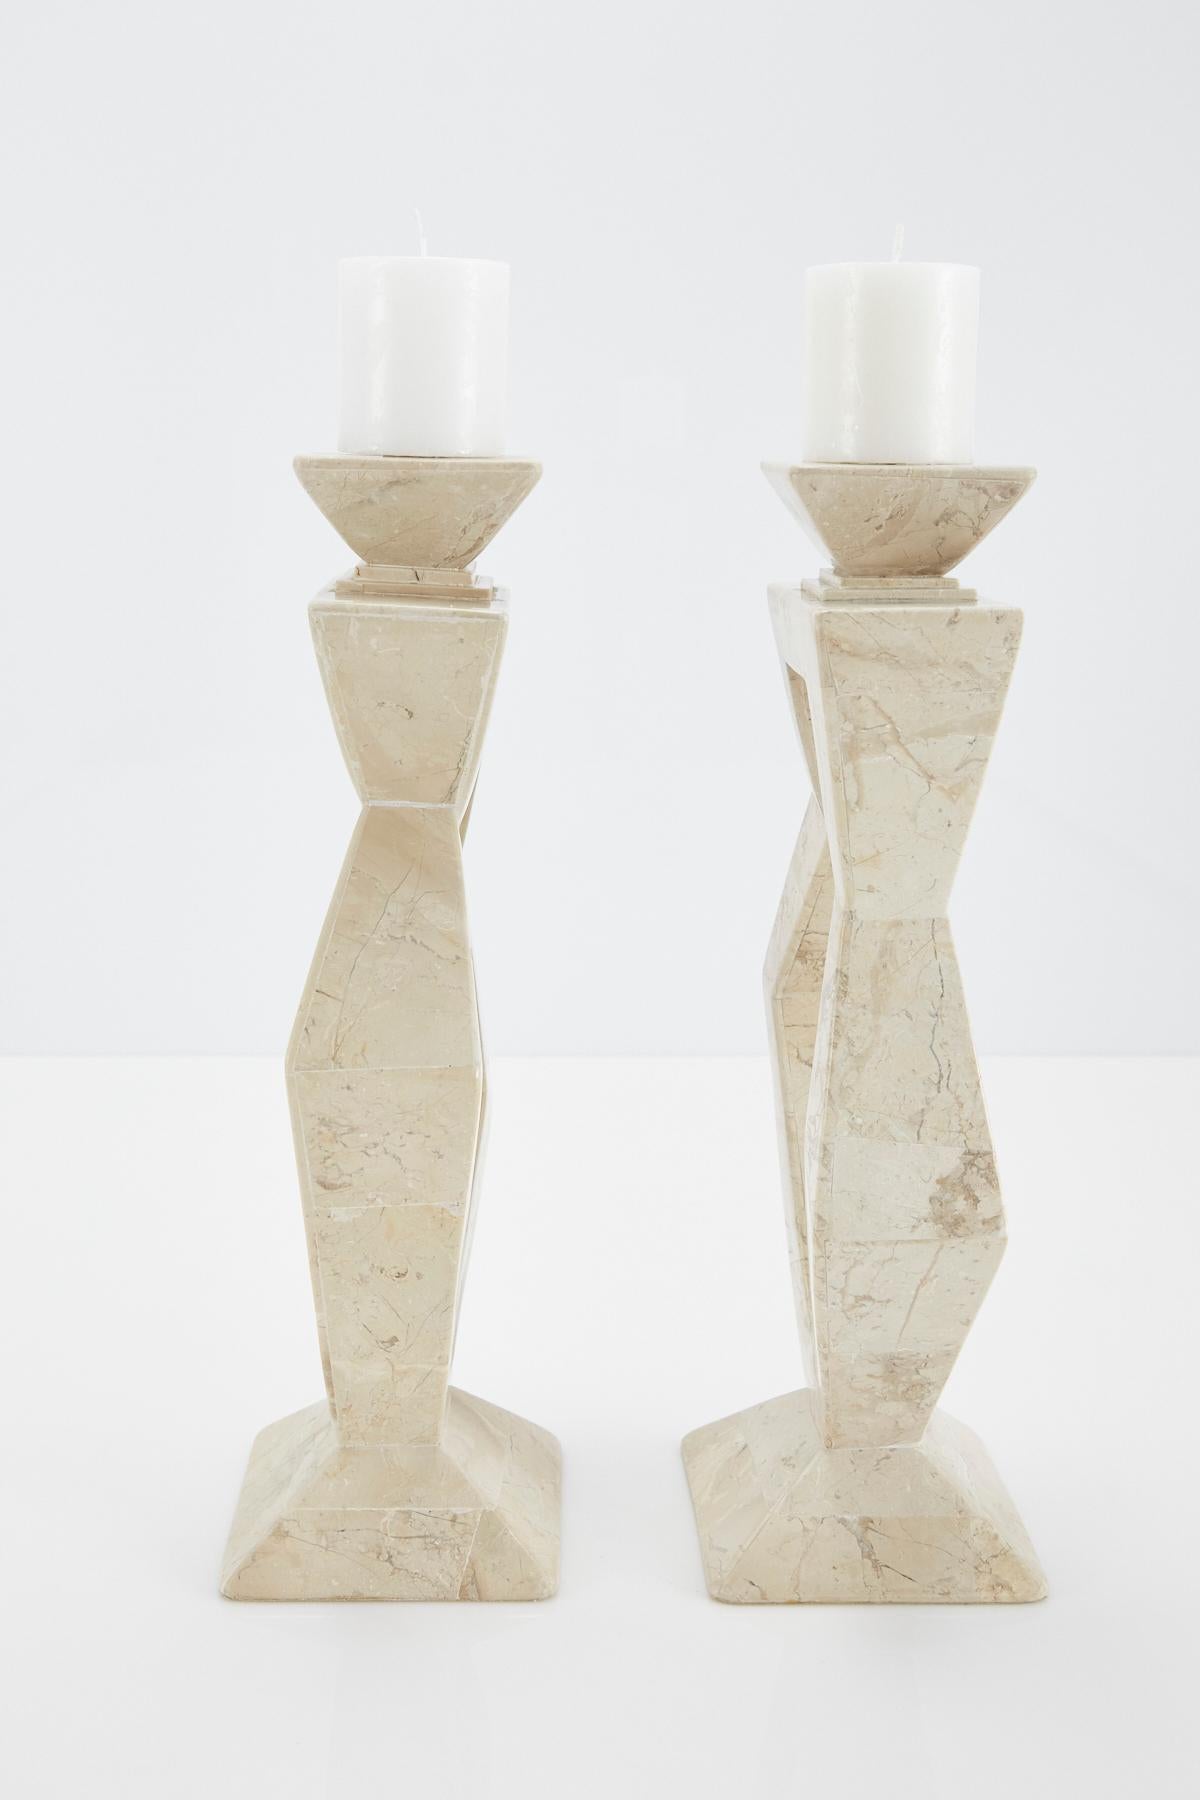 Philippine Pair of Oversized Postmodern Tessellated Cantor Stone Candlesticks, 1990s